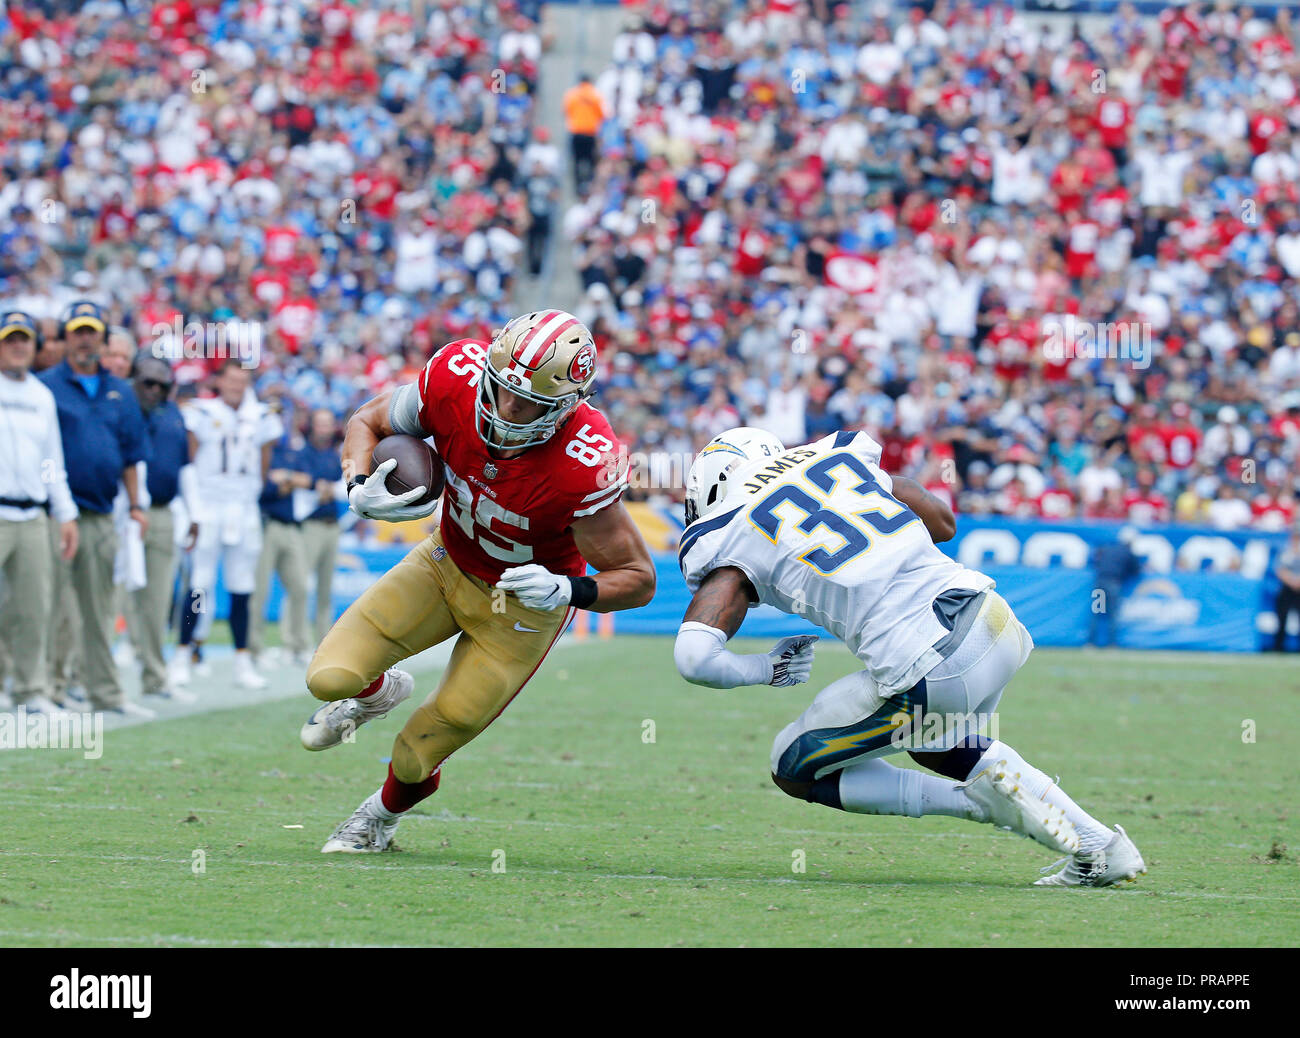 San Francisco 49ers tight end George Kittle (85) makes a catch during an  NFL football game against the Seattle Seahawks, Sunday, Oct. 3, 2021 in  Santa Clara, Calif. (AP Photo/Lachlan Cunningham Stock